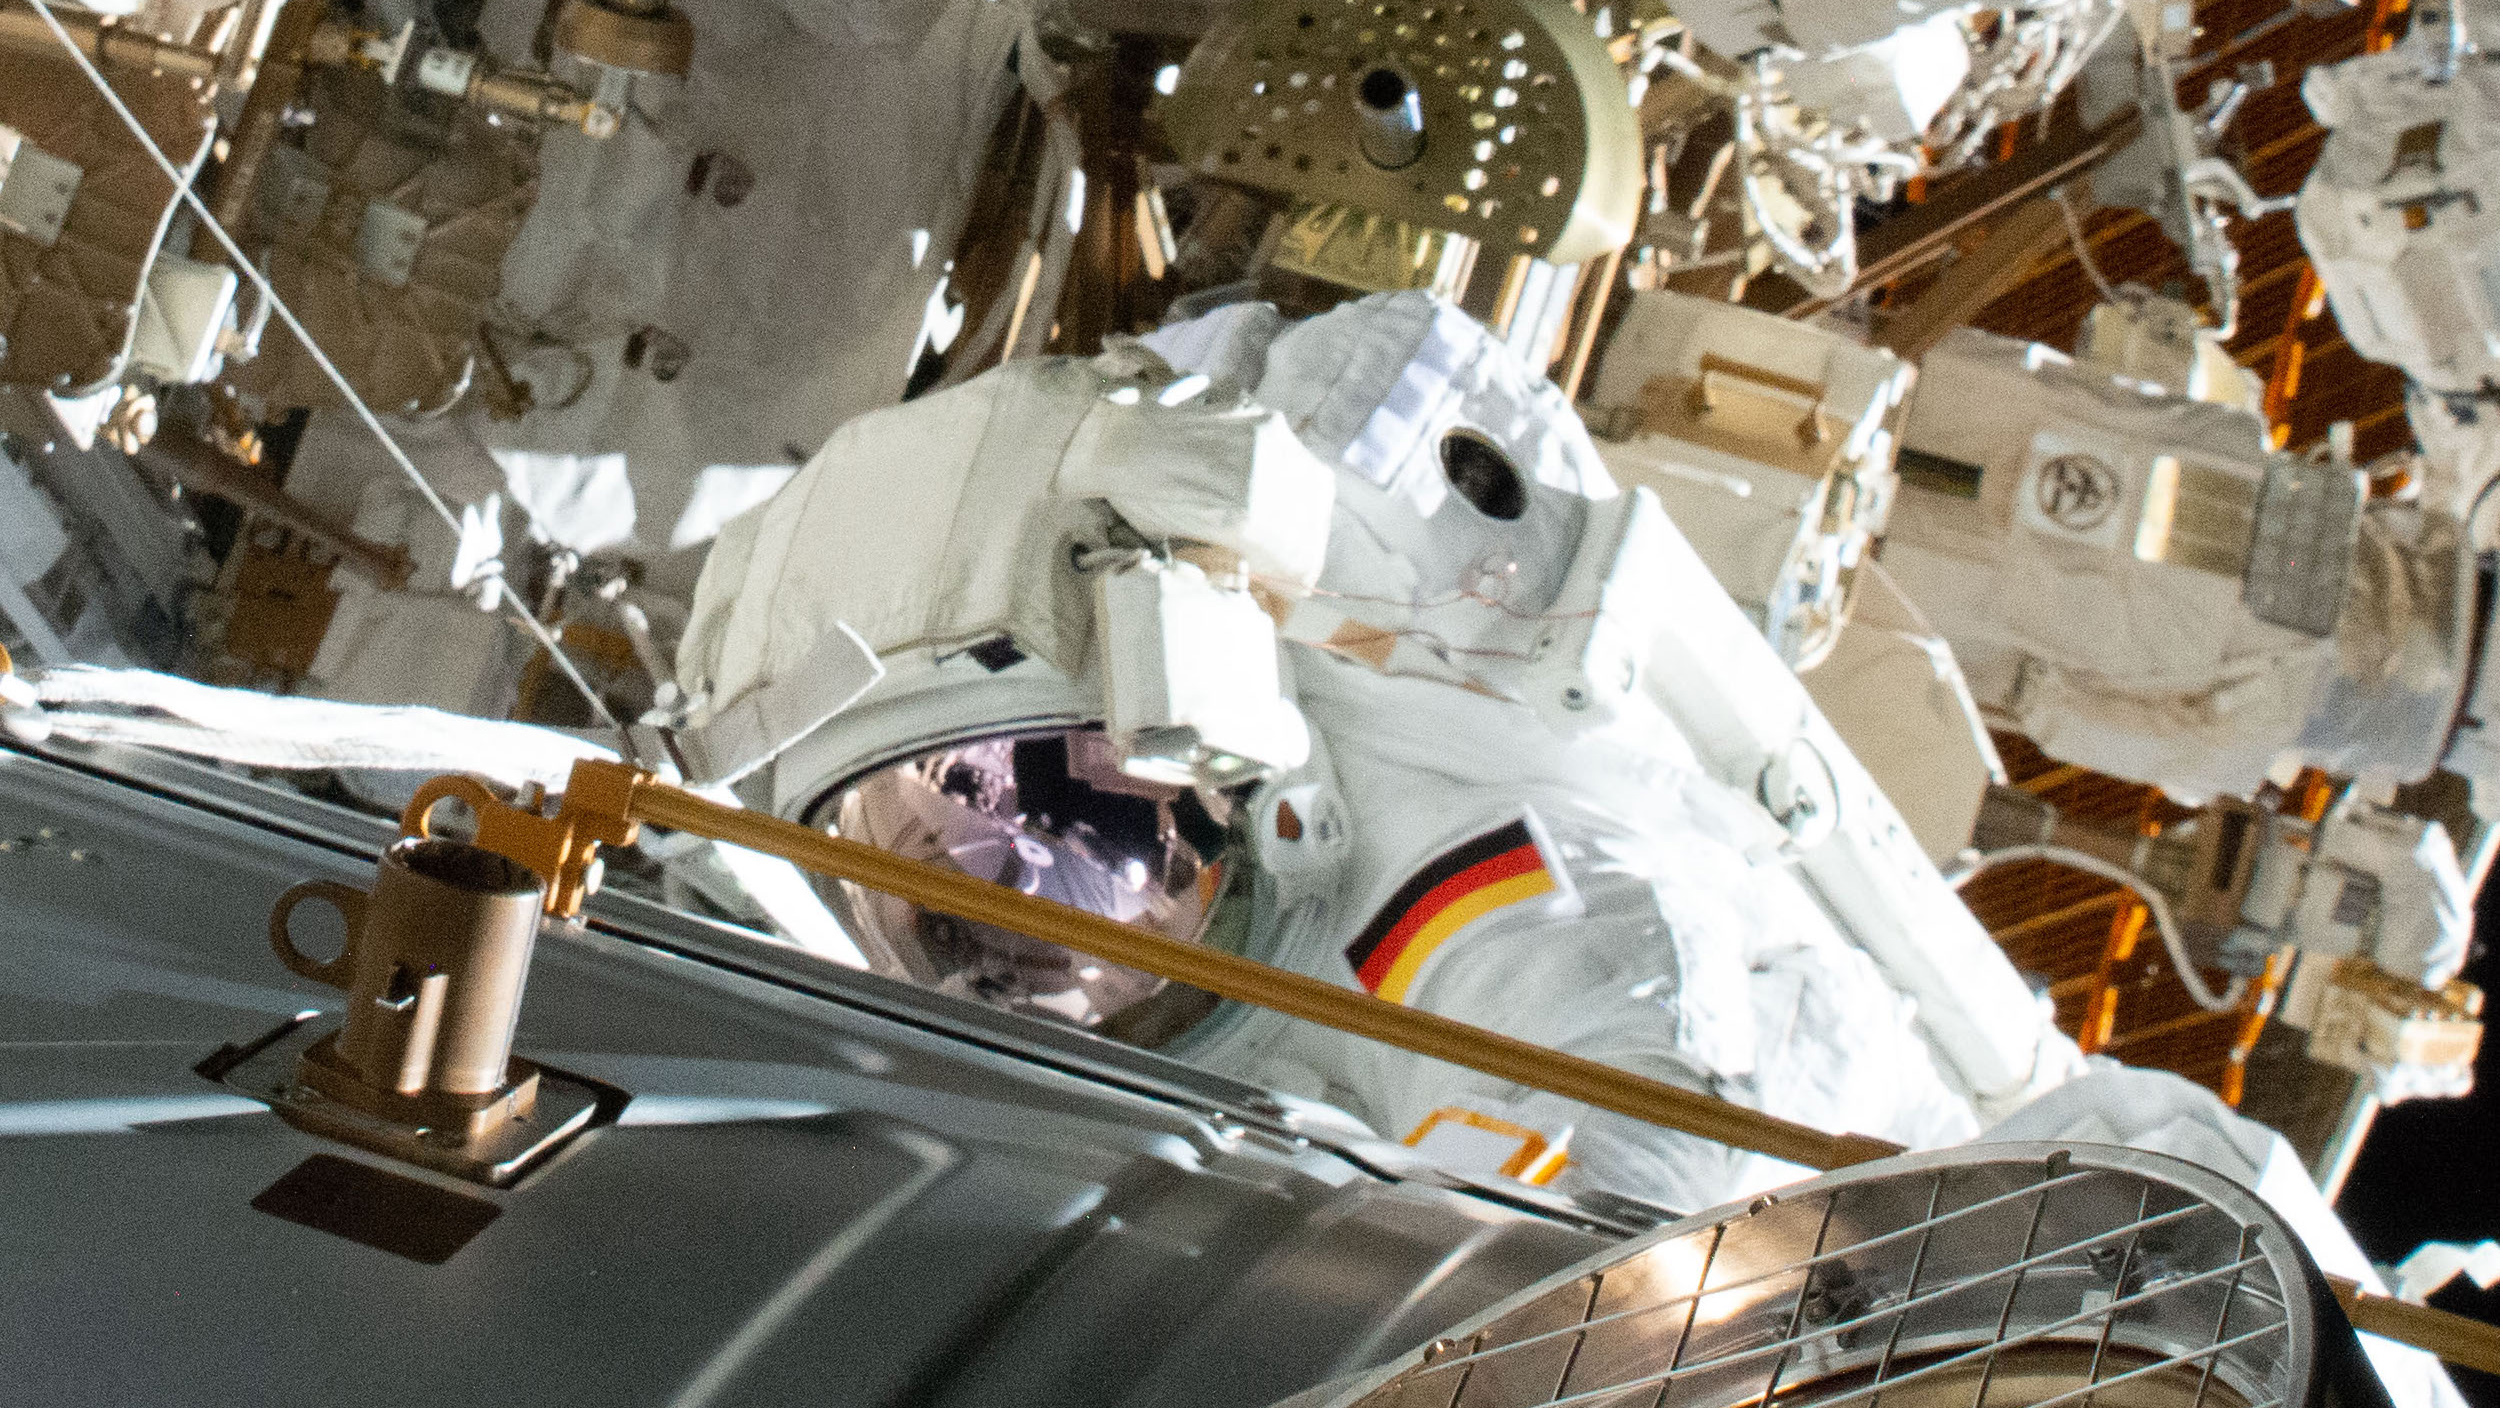 The European astronaut Matthias Maurer during his first ever space walk at the International Space Station.